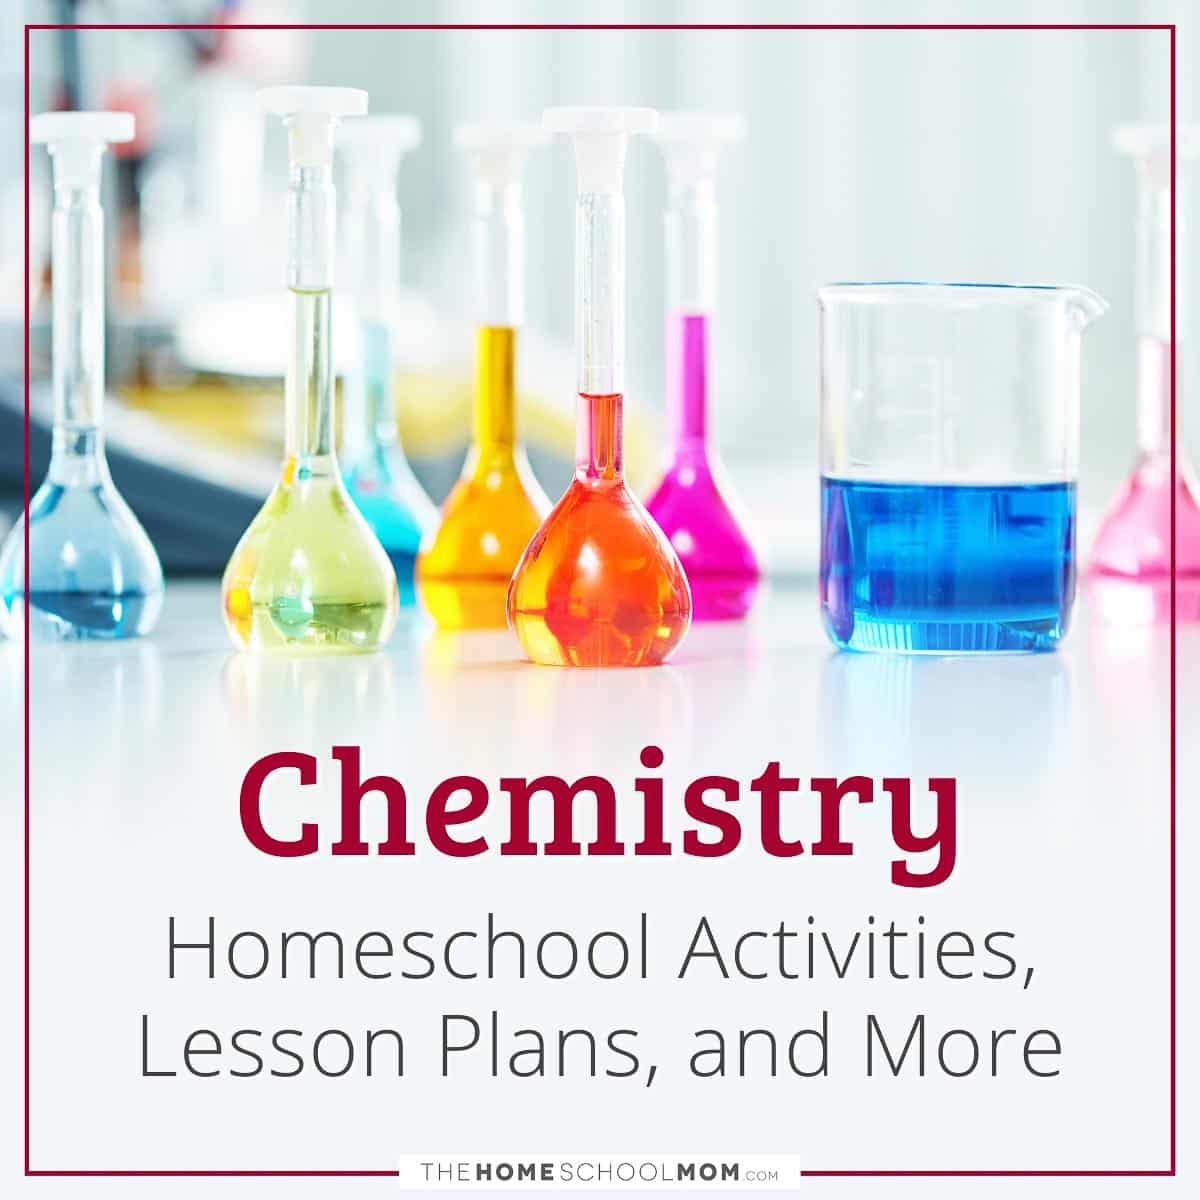 Chemistry Homeschool Activities, Lesson Plans, and More.